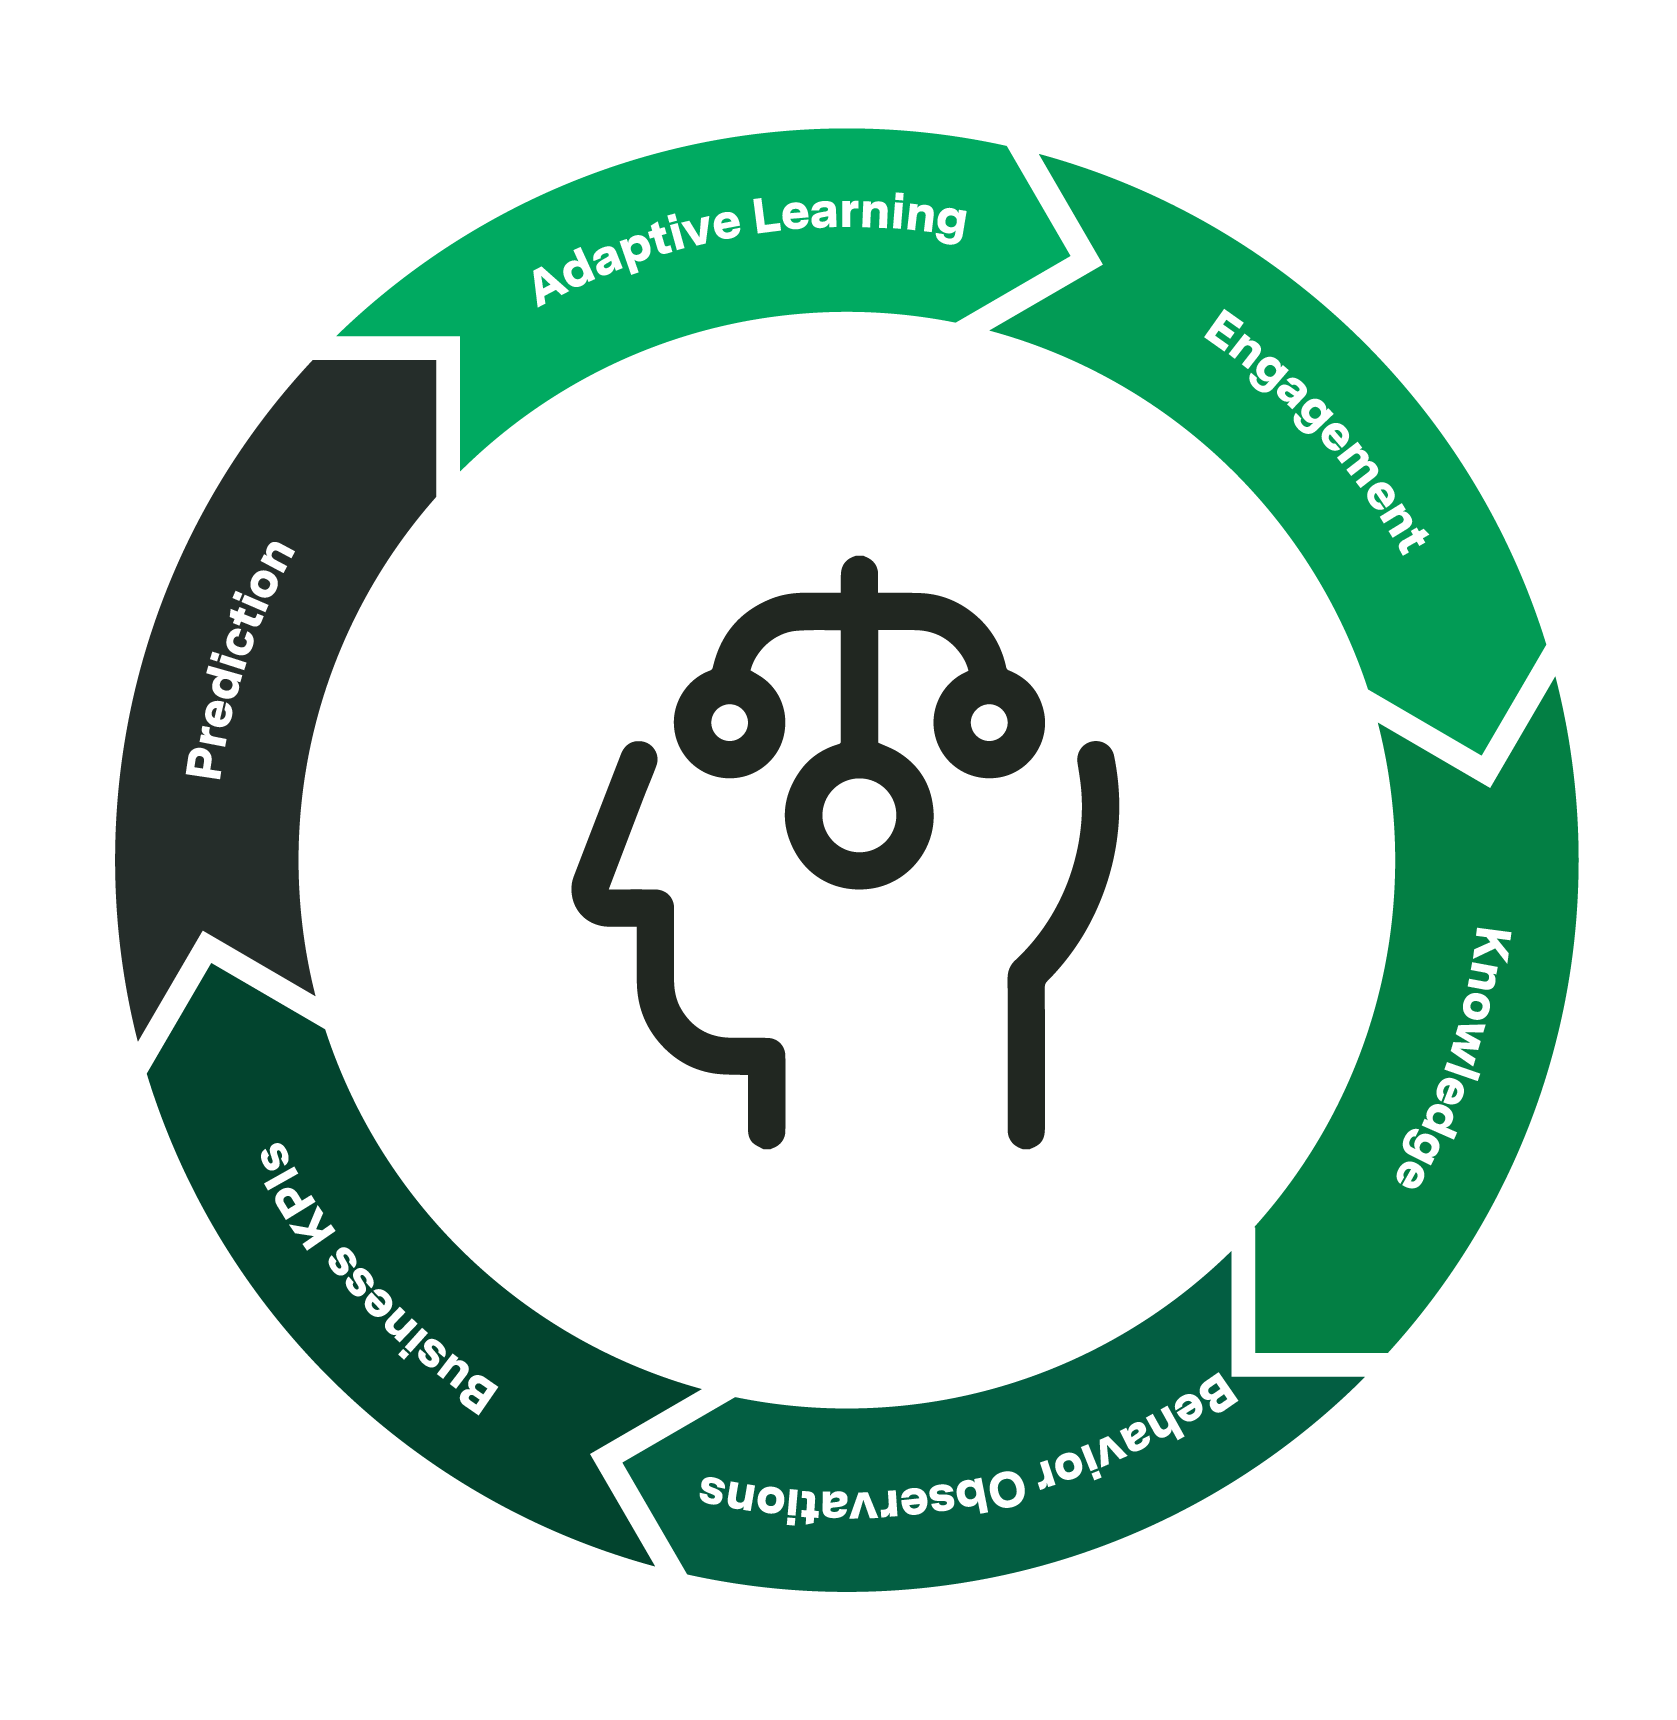 Graphic displaying how adaptive learning improves engagement and ties training to business objectives